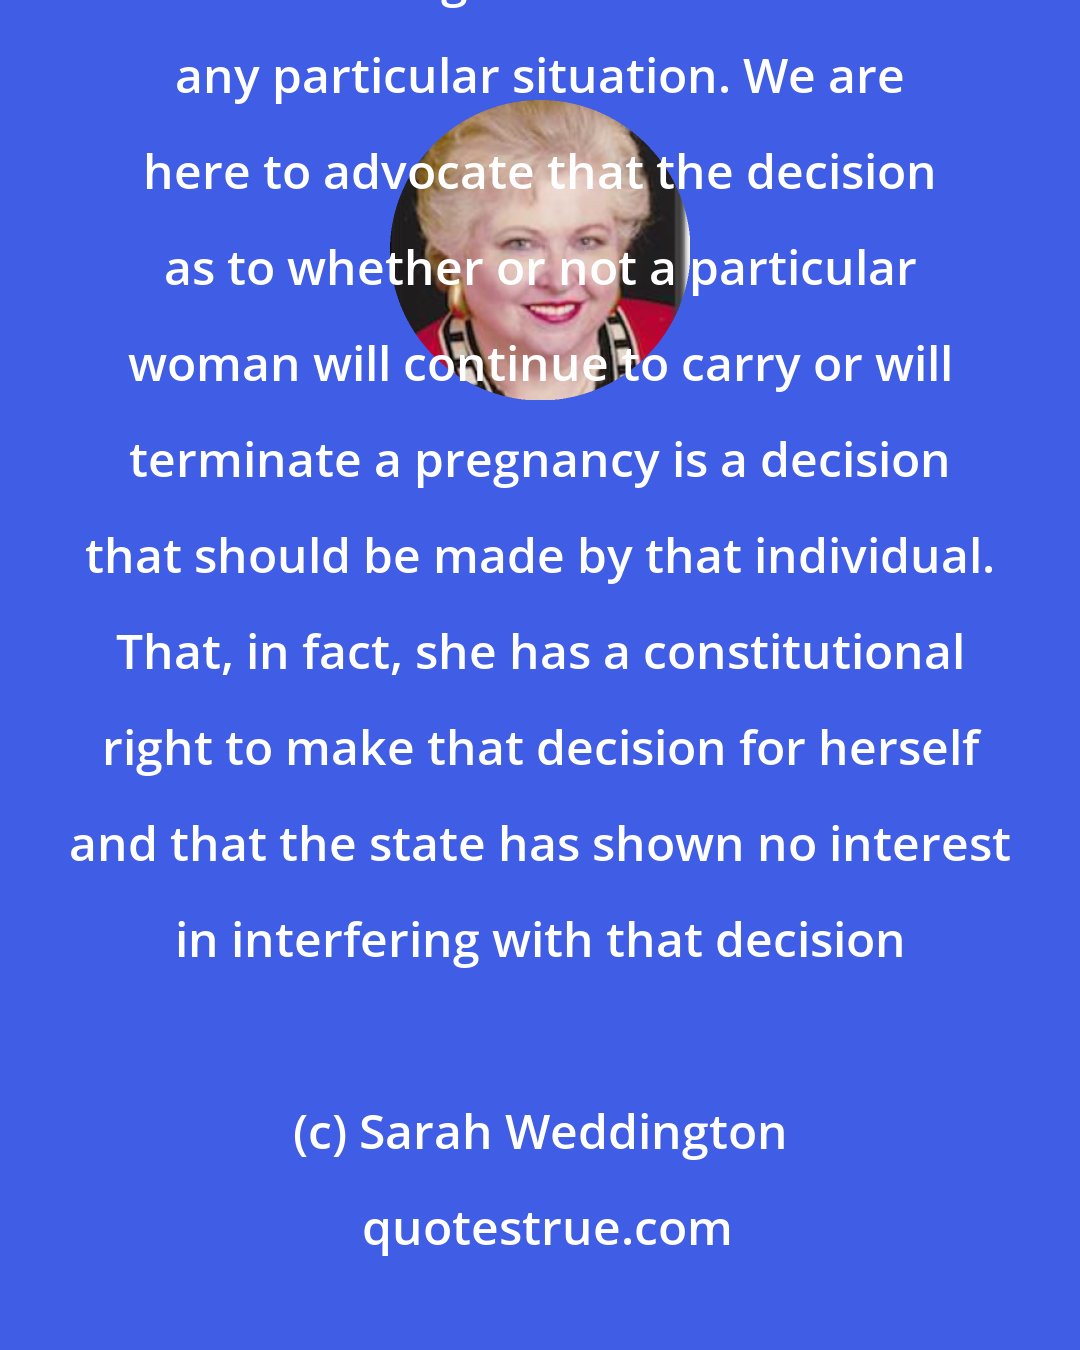 Sarah Weddington: We are not here to advocate abortion. We do not ask this Court to rule that abortion is good or desirable in any particular situation. We are here to advocate that the decision as to whether or not a particular woman will continue to carry or will terminate a pregnancy is a decision that should be made by that individual. That, in fact, she has a constitutional right to make that decision for herself and that the state has shown no interest in interfering with that decision